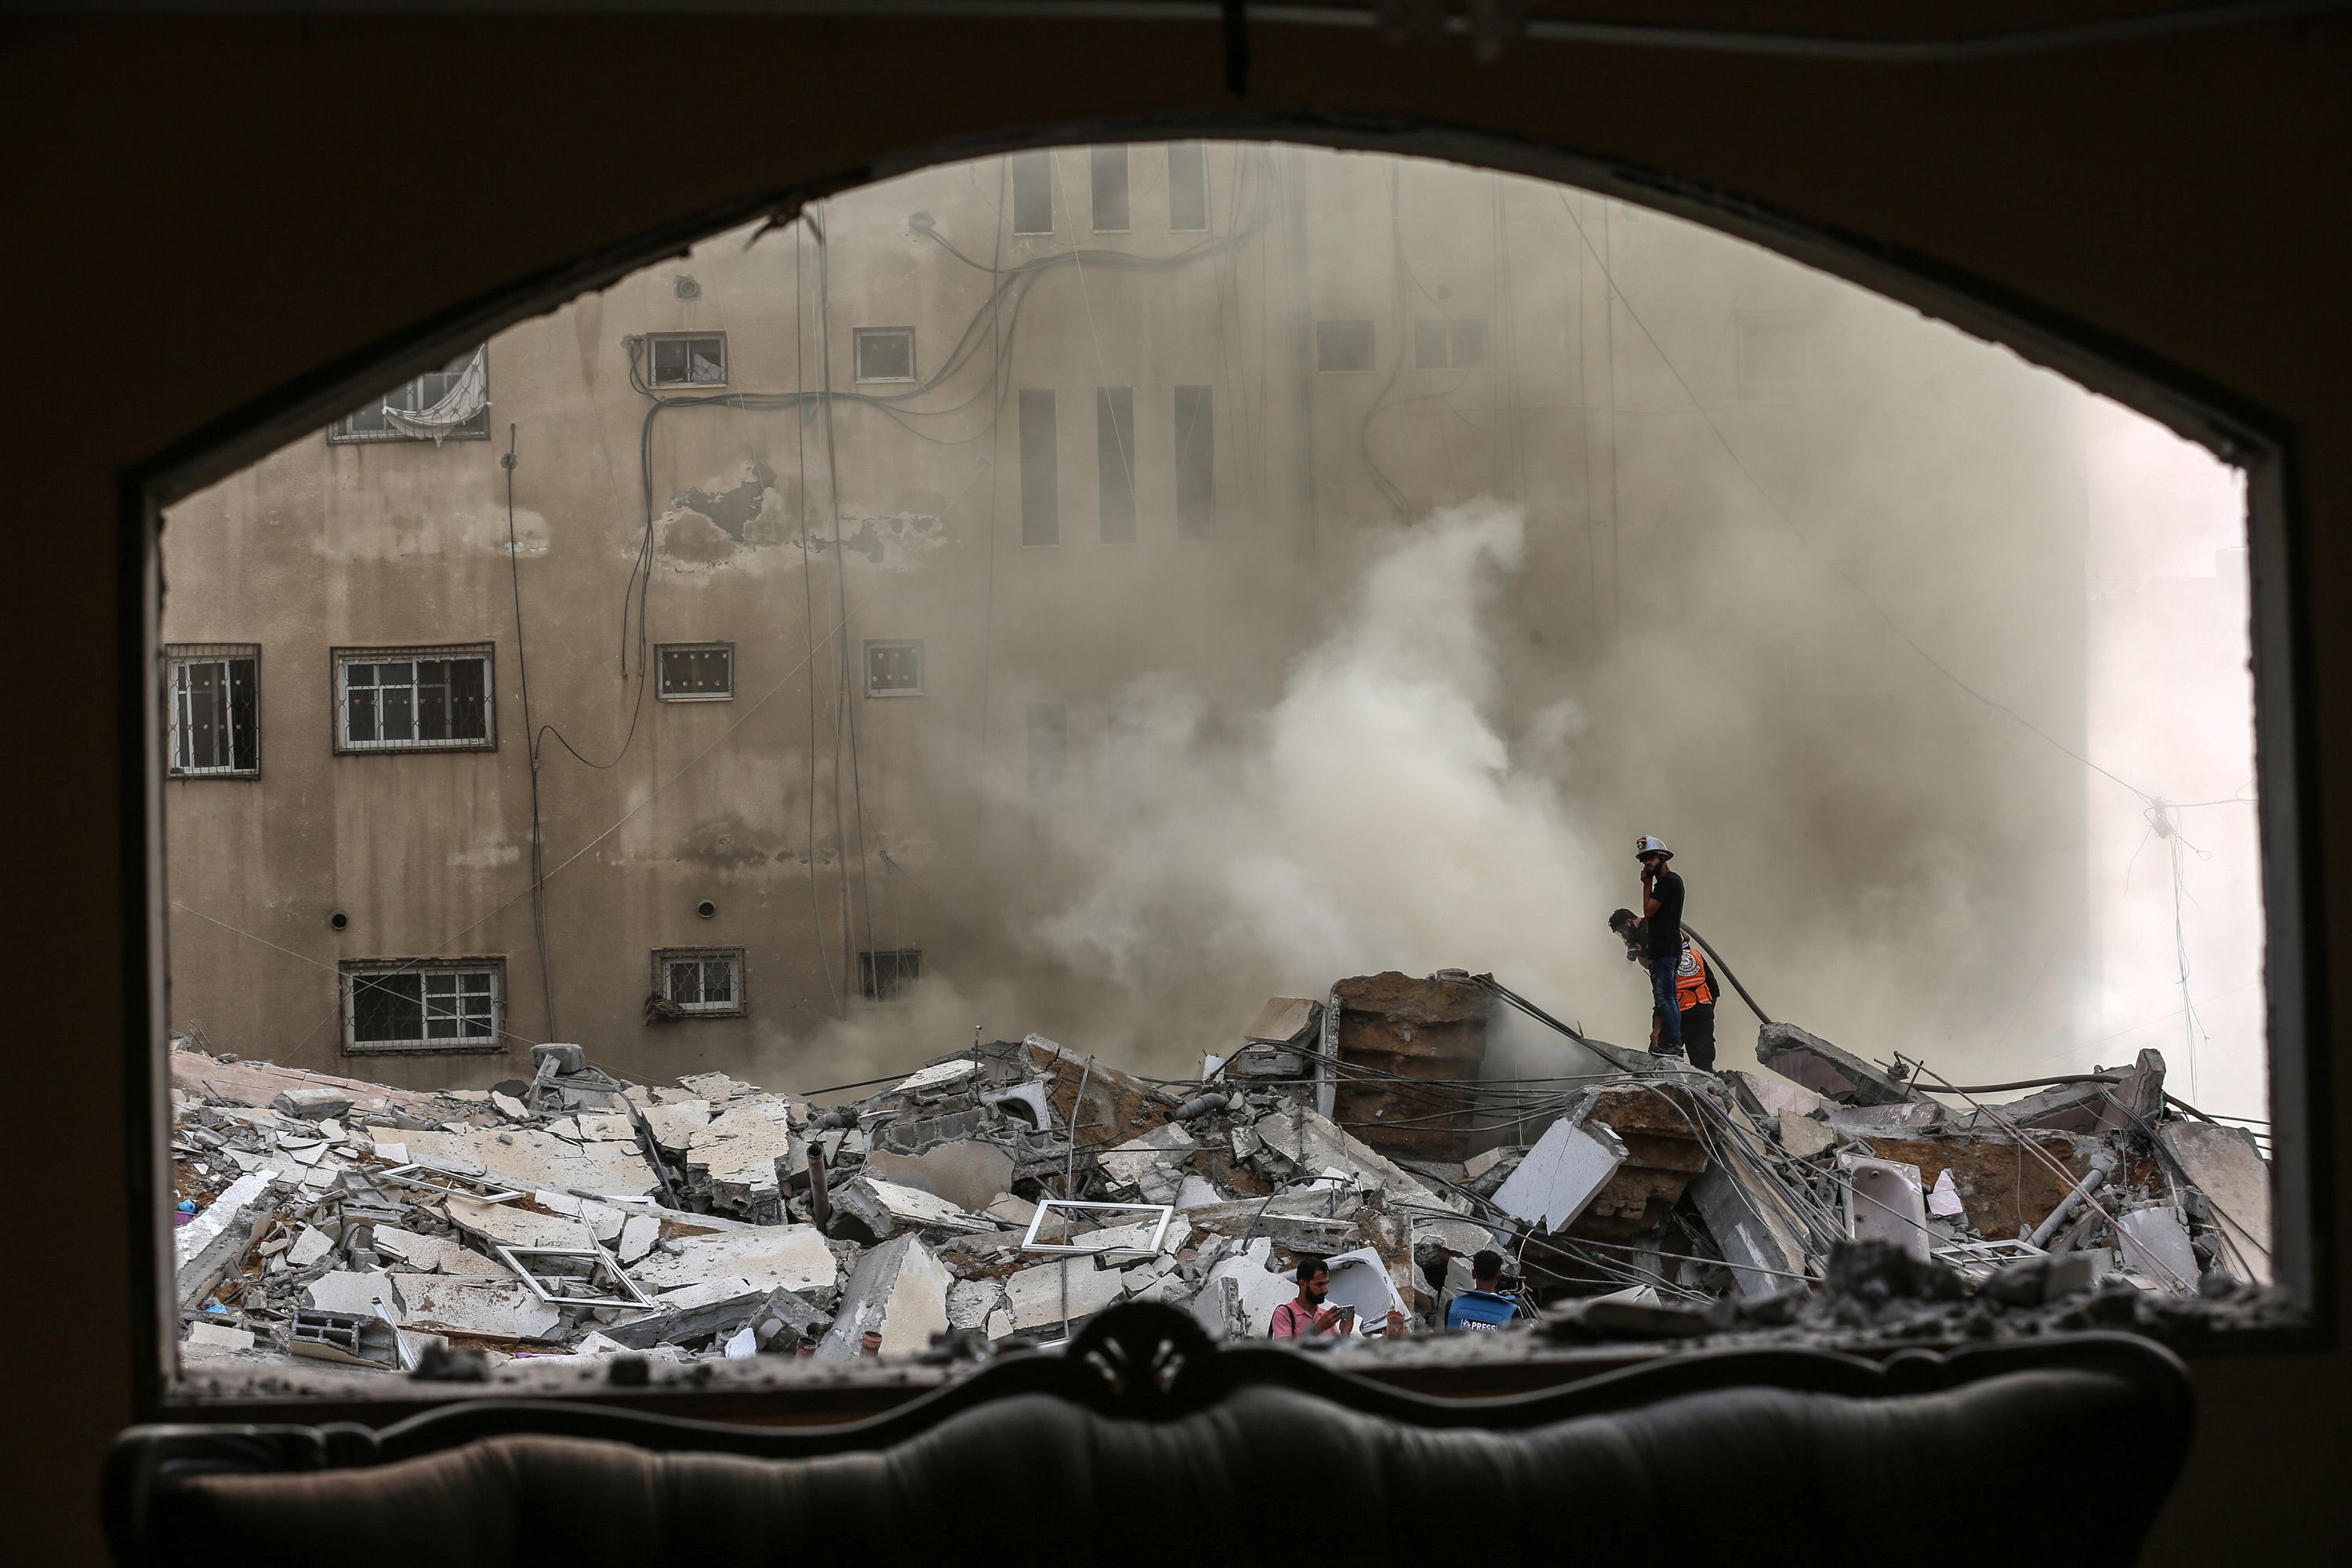 Palestinians inspect a destroyed building as emergency responders try to contain fires after Israeli jets bombed Gaza on October 7.